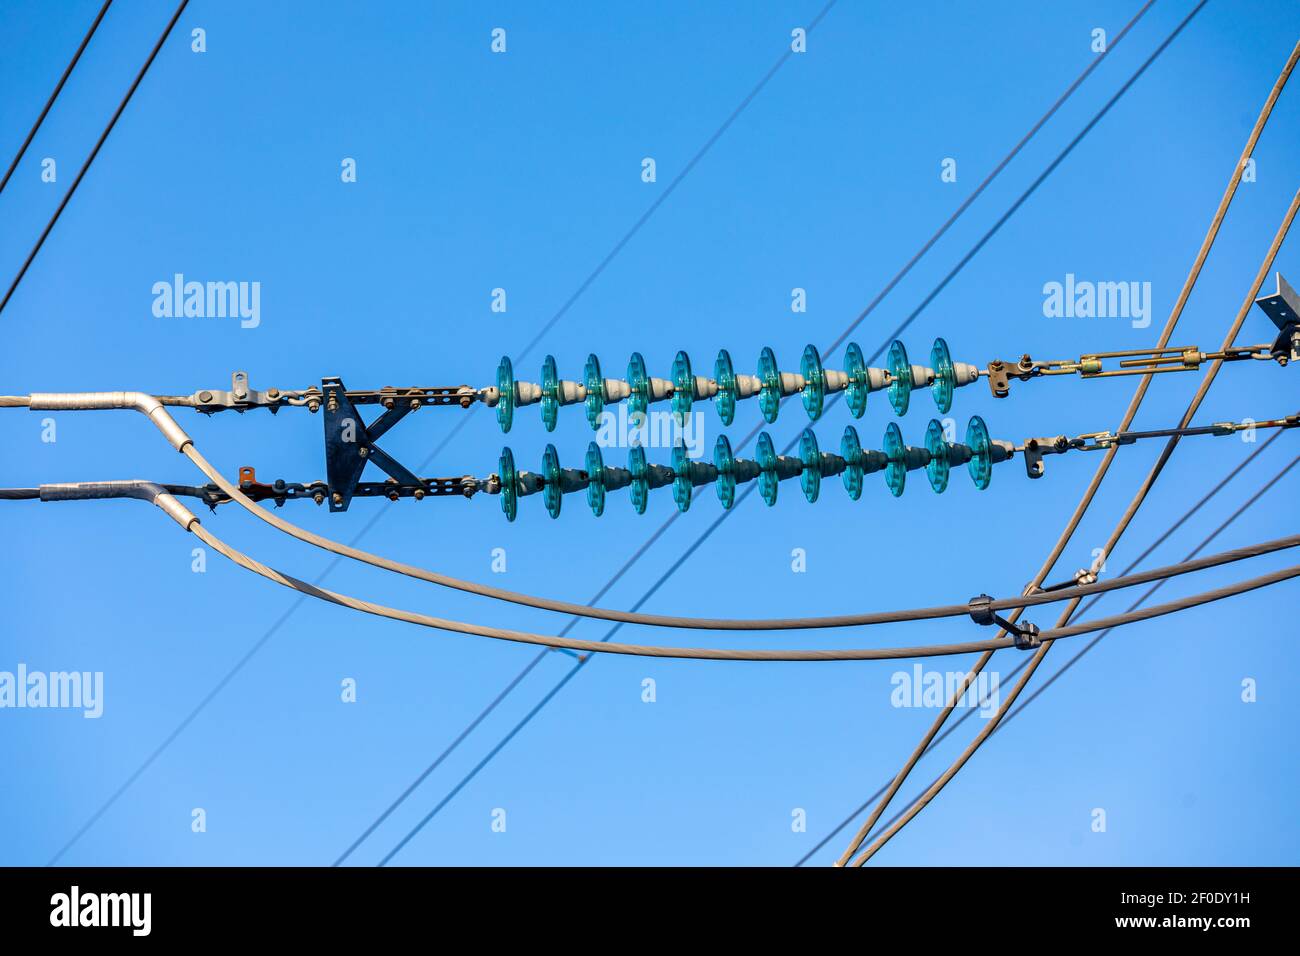 New large mast of an air power line close up, high voltage electricity pylon with thick wires and insulators, blue sky on background. Traditional Stock Photo